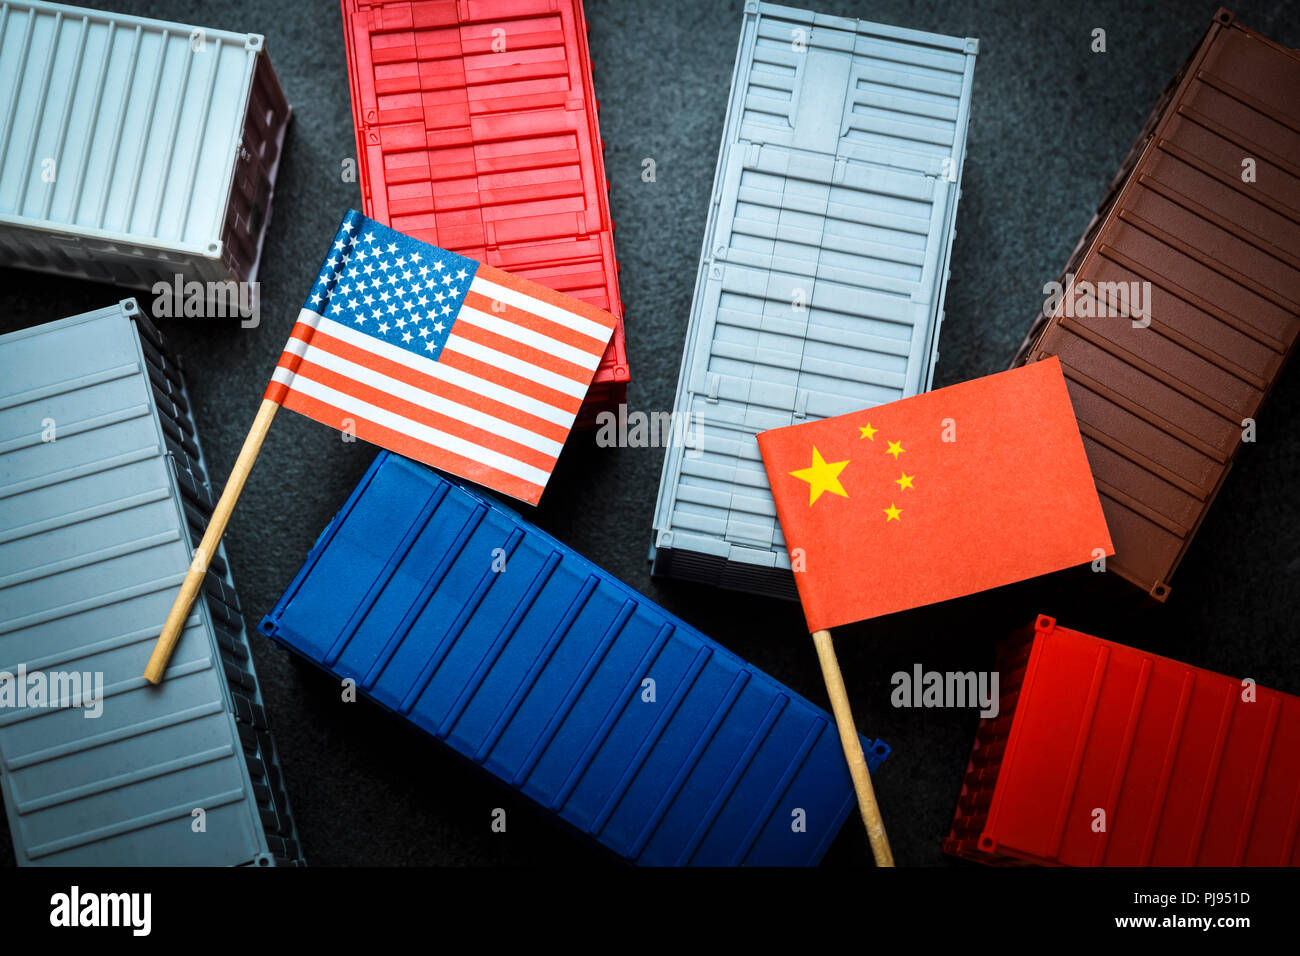 Flags of China and the USA on containers, symbolic photo commercial war, Fahnen von China und USA auf Containern, Symbolfoto Handelskrieg Stock Photo